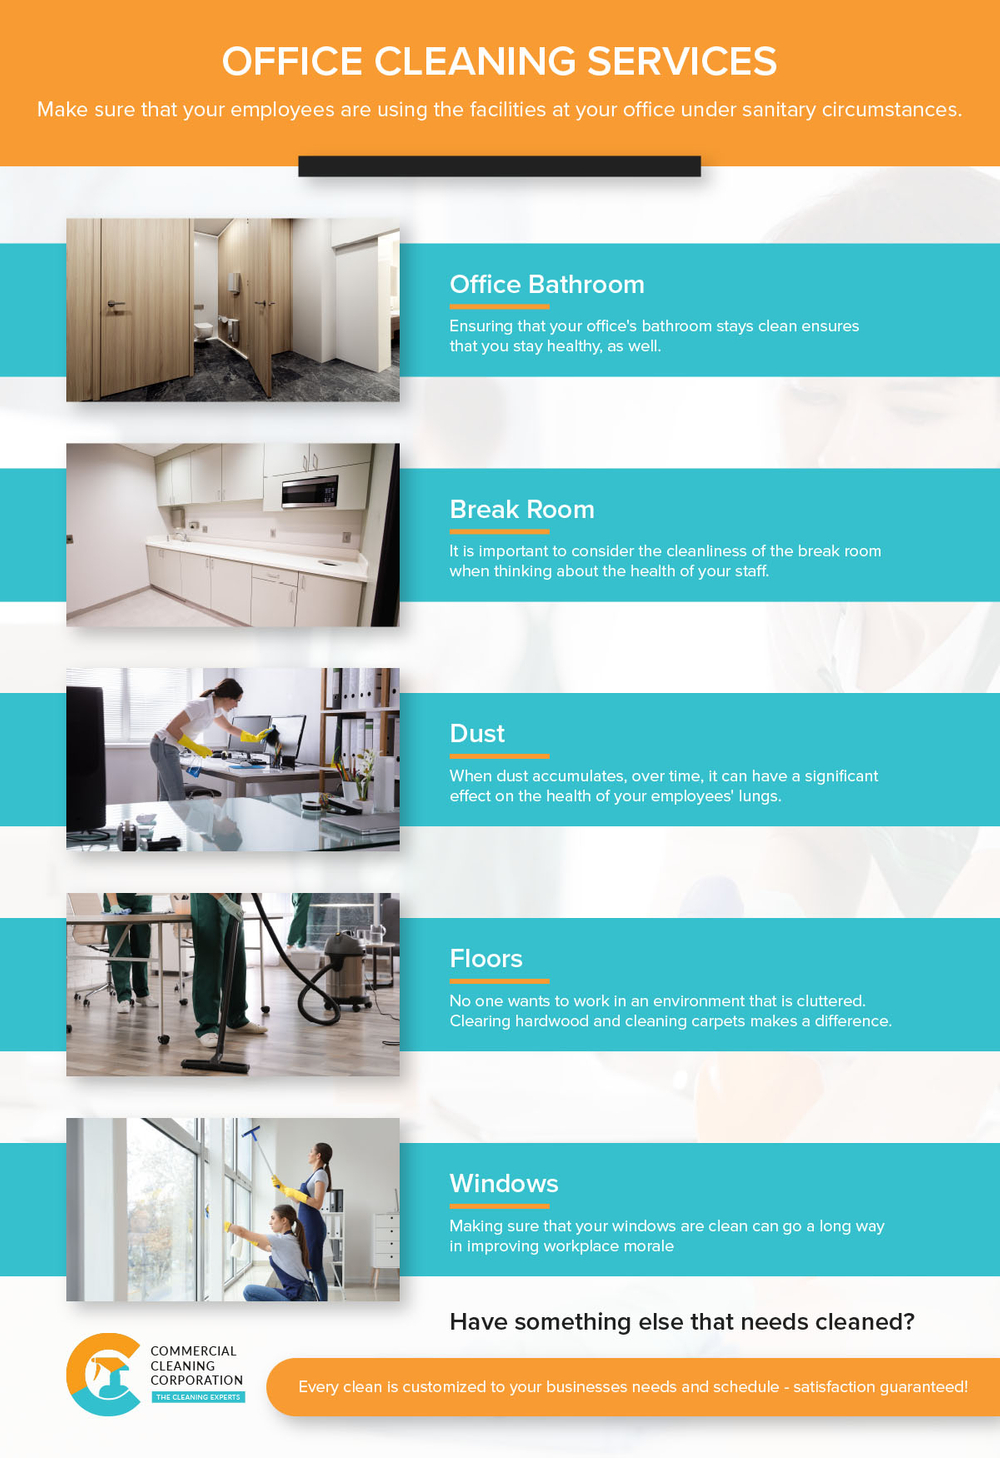 Office Cleaning Services Infographic.jpg